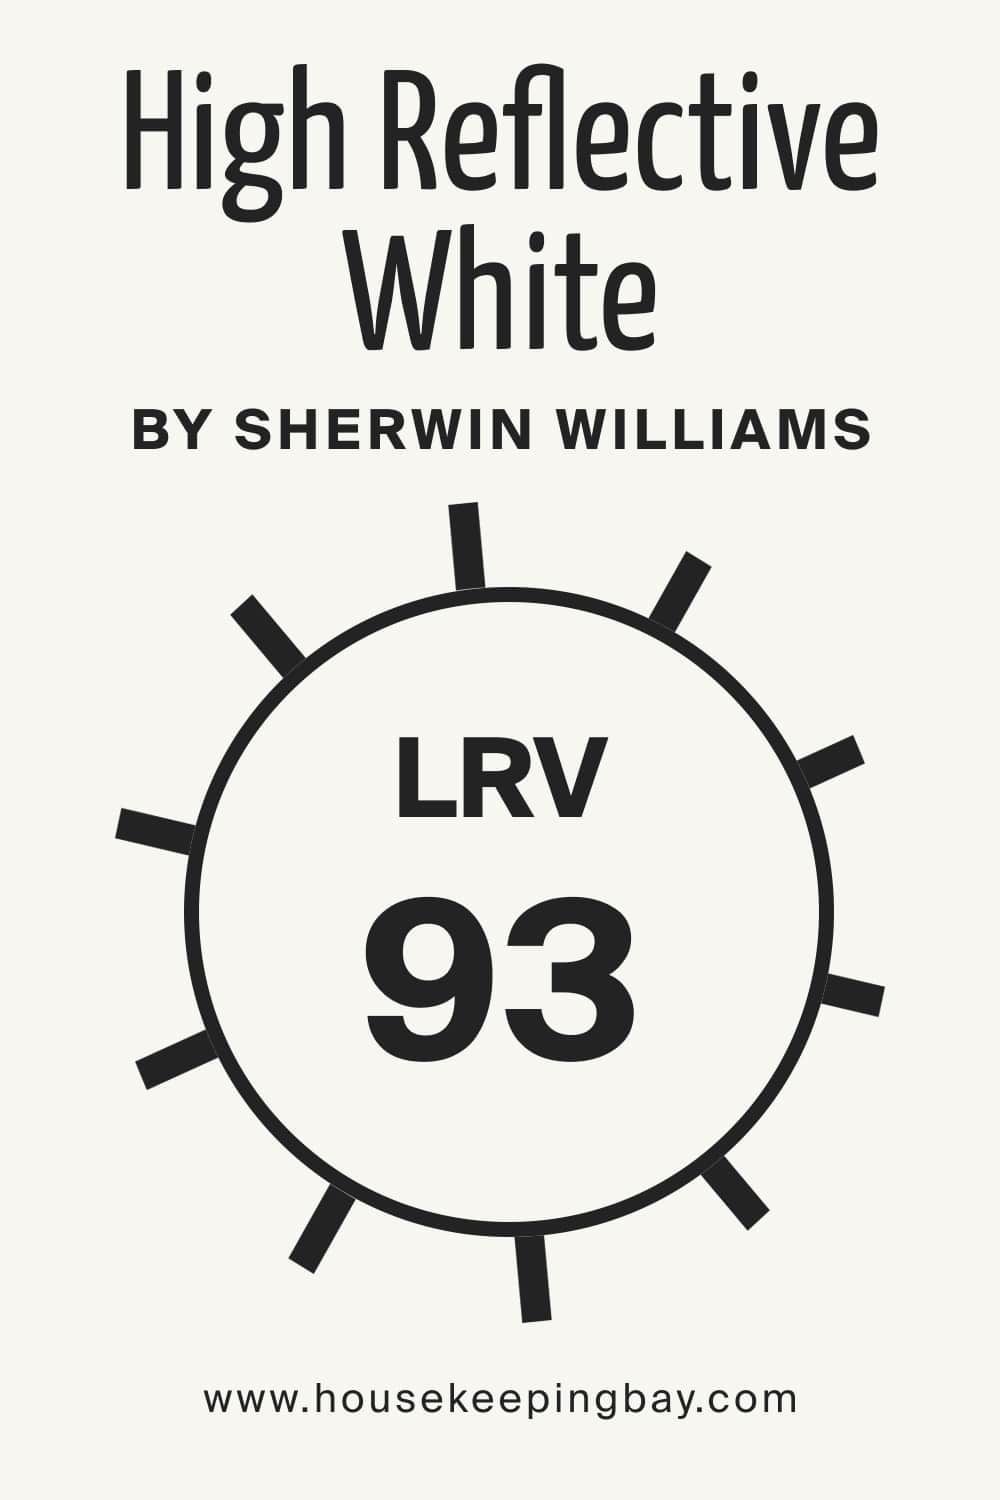 High Reflective White SW 7757 by Sherwin Williams. LRV – 93